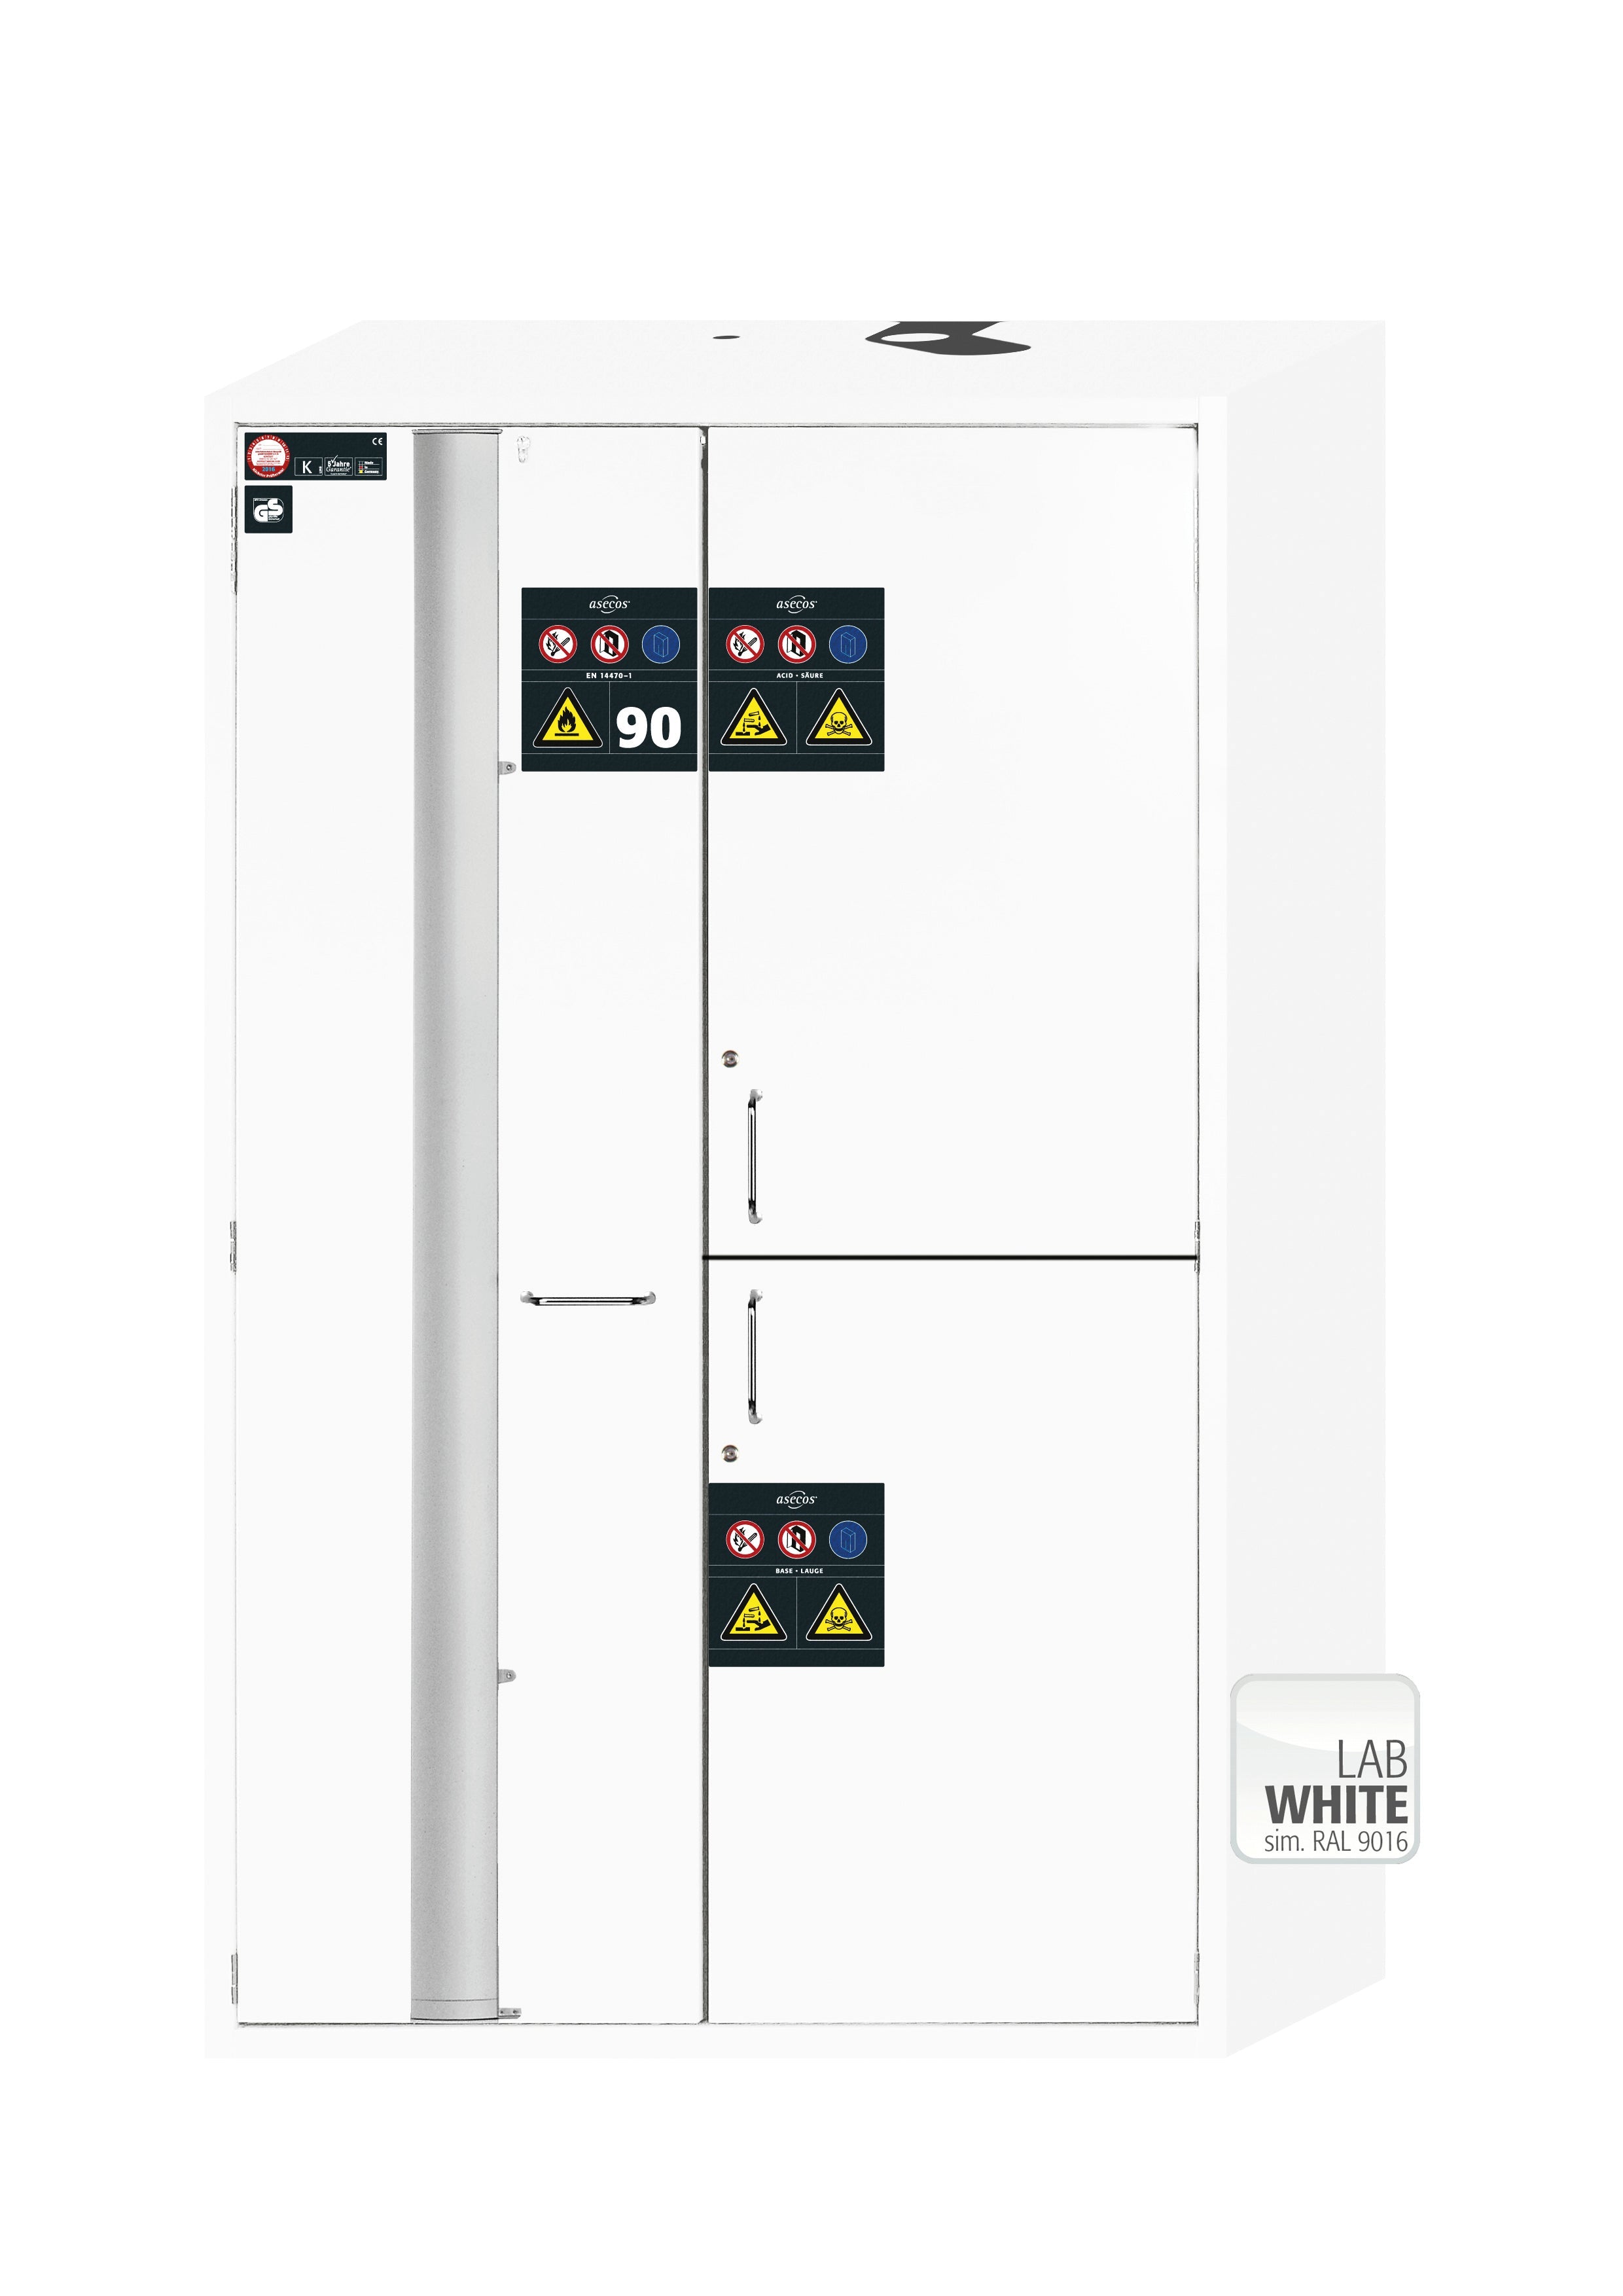 Type 90 combination safety cabinet K-PHOENIX Vol.2-90 model K90.196.120.MF.FWAC in laboratory white (similar to RAL 9016) with 3x standard tray base (sheet steel)